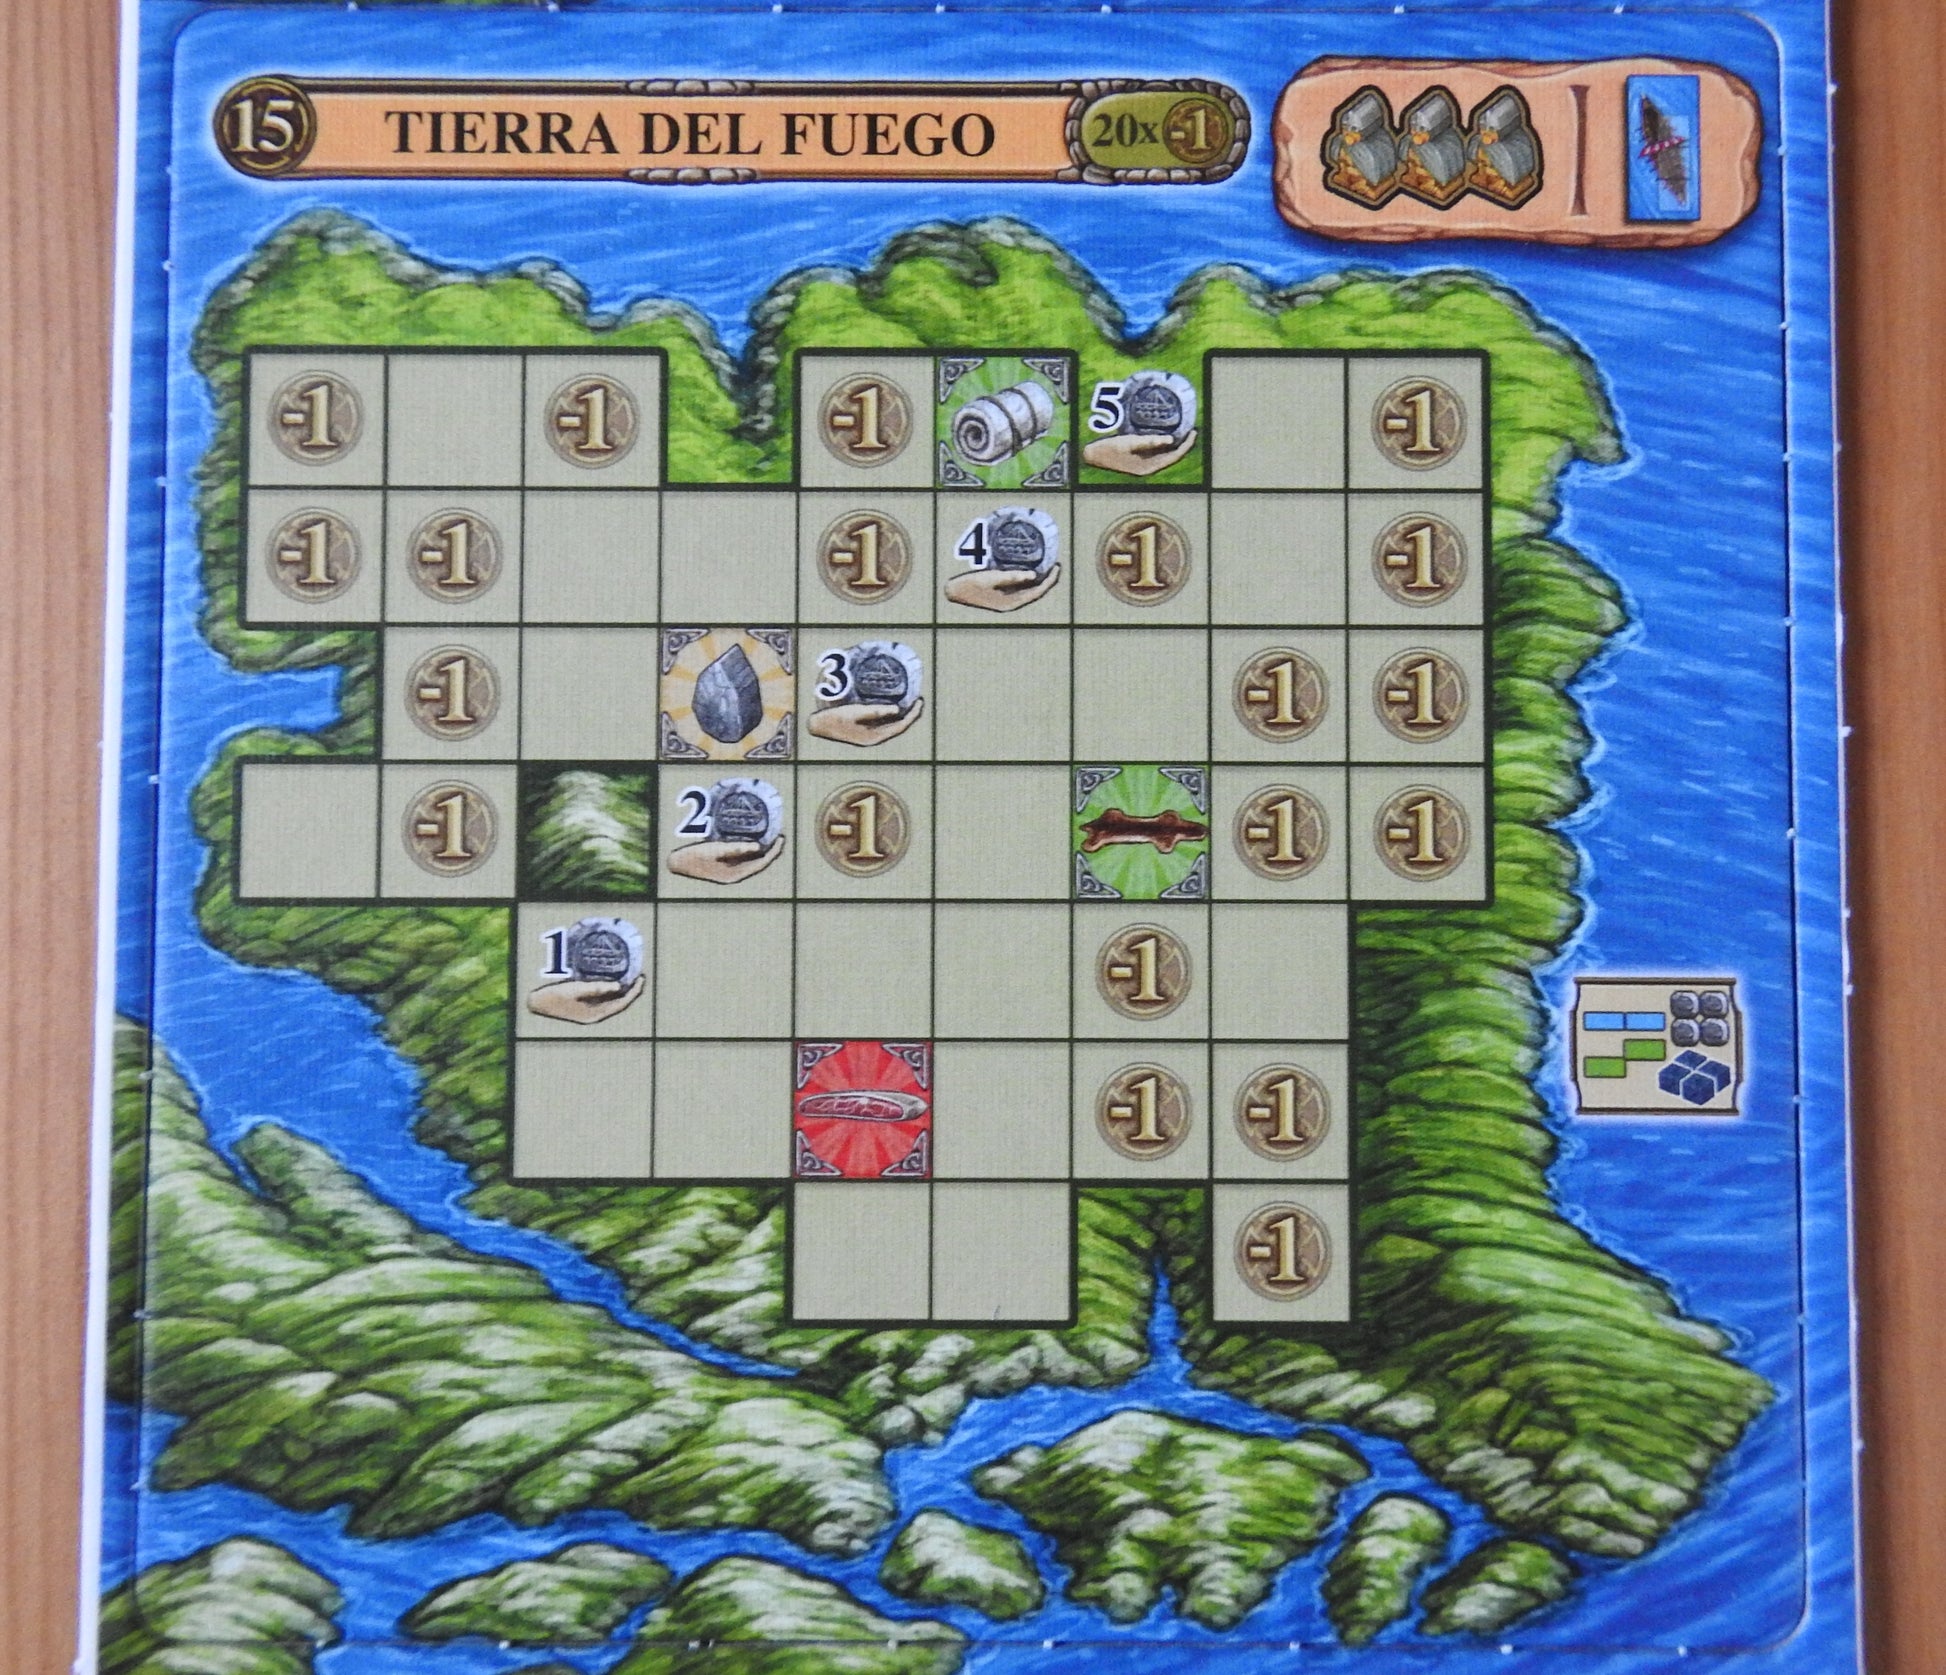 Close-up view of the Tierra del Fuego (daytime) exploration board.